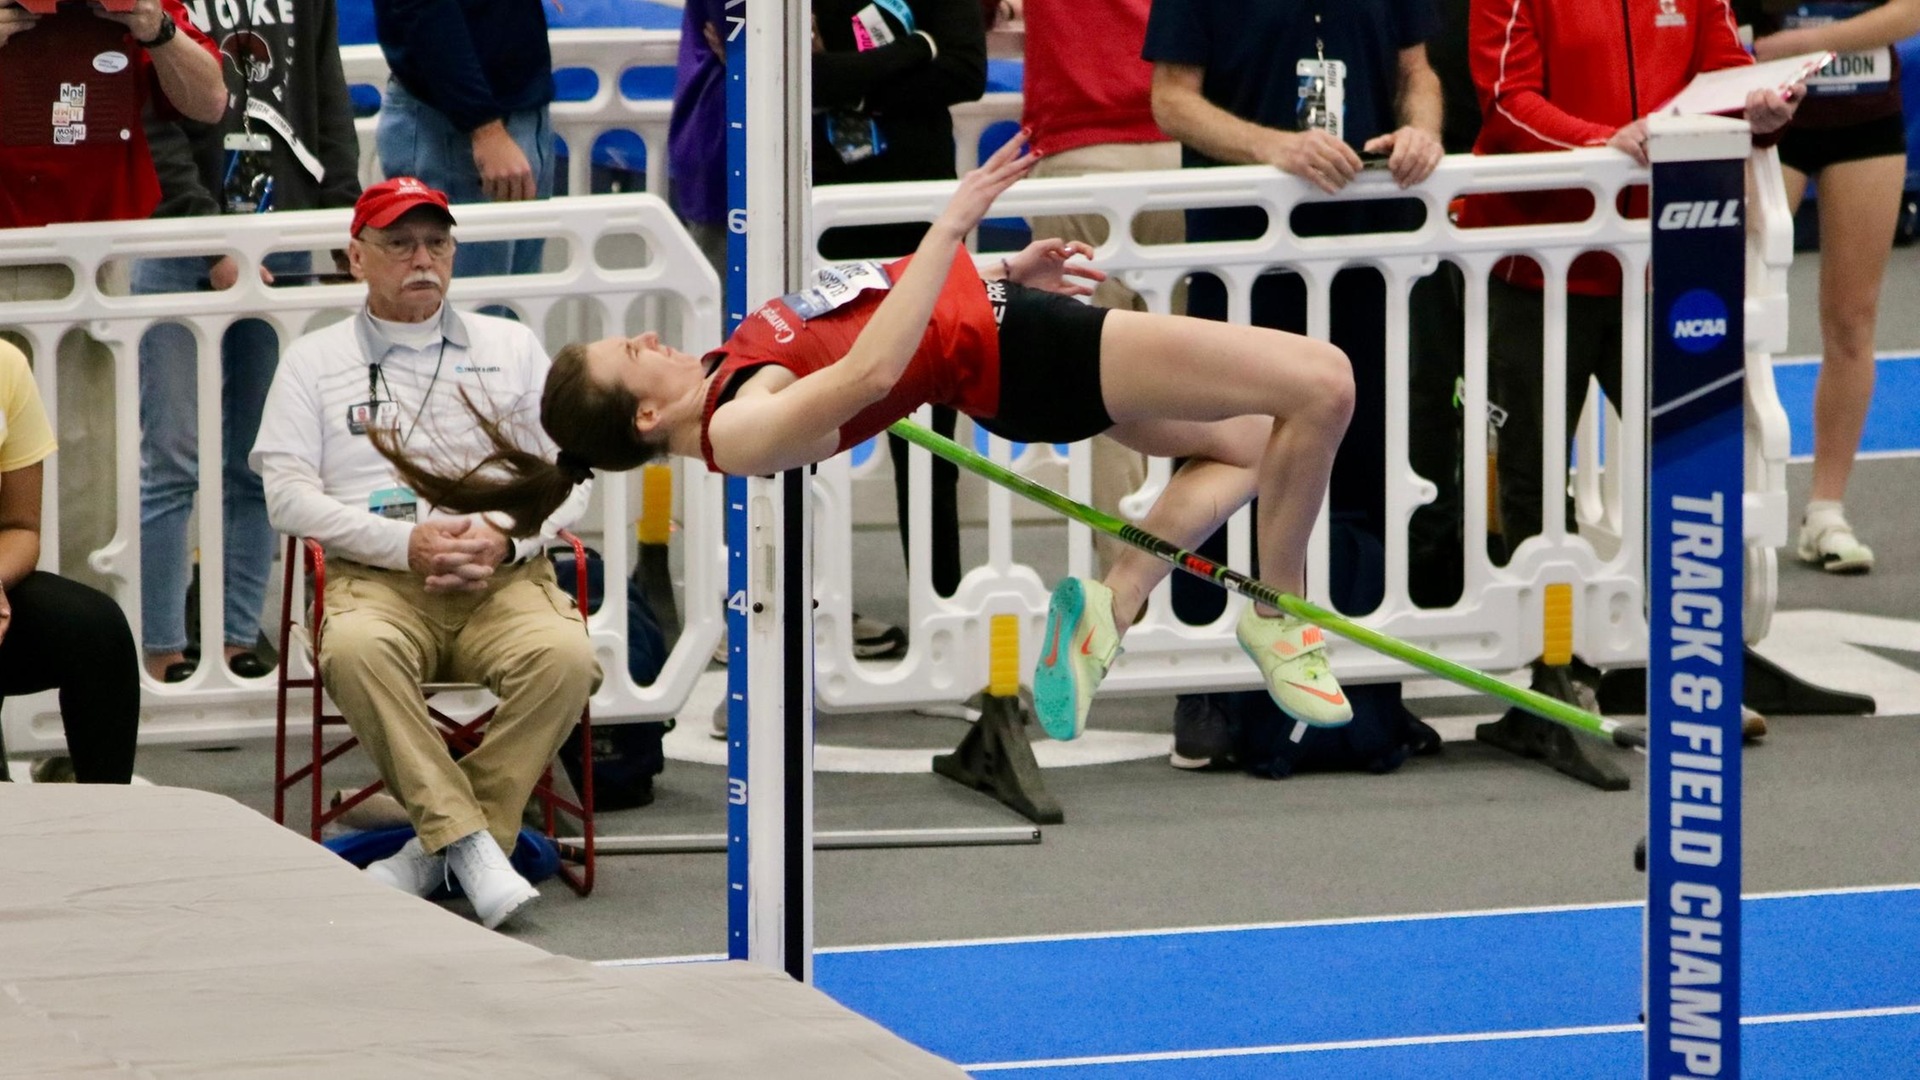 Barre Places Third in High Jump at NCAA Indoor Championships